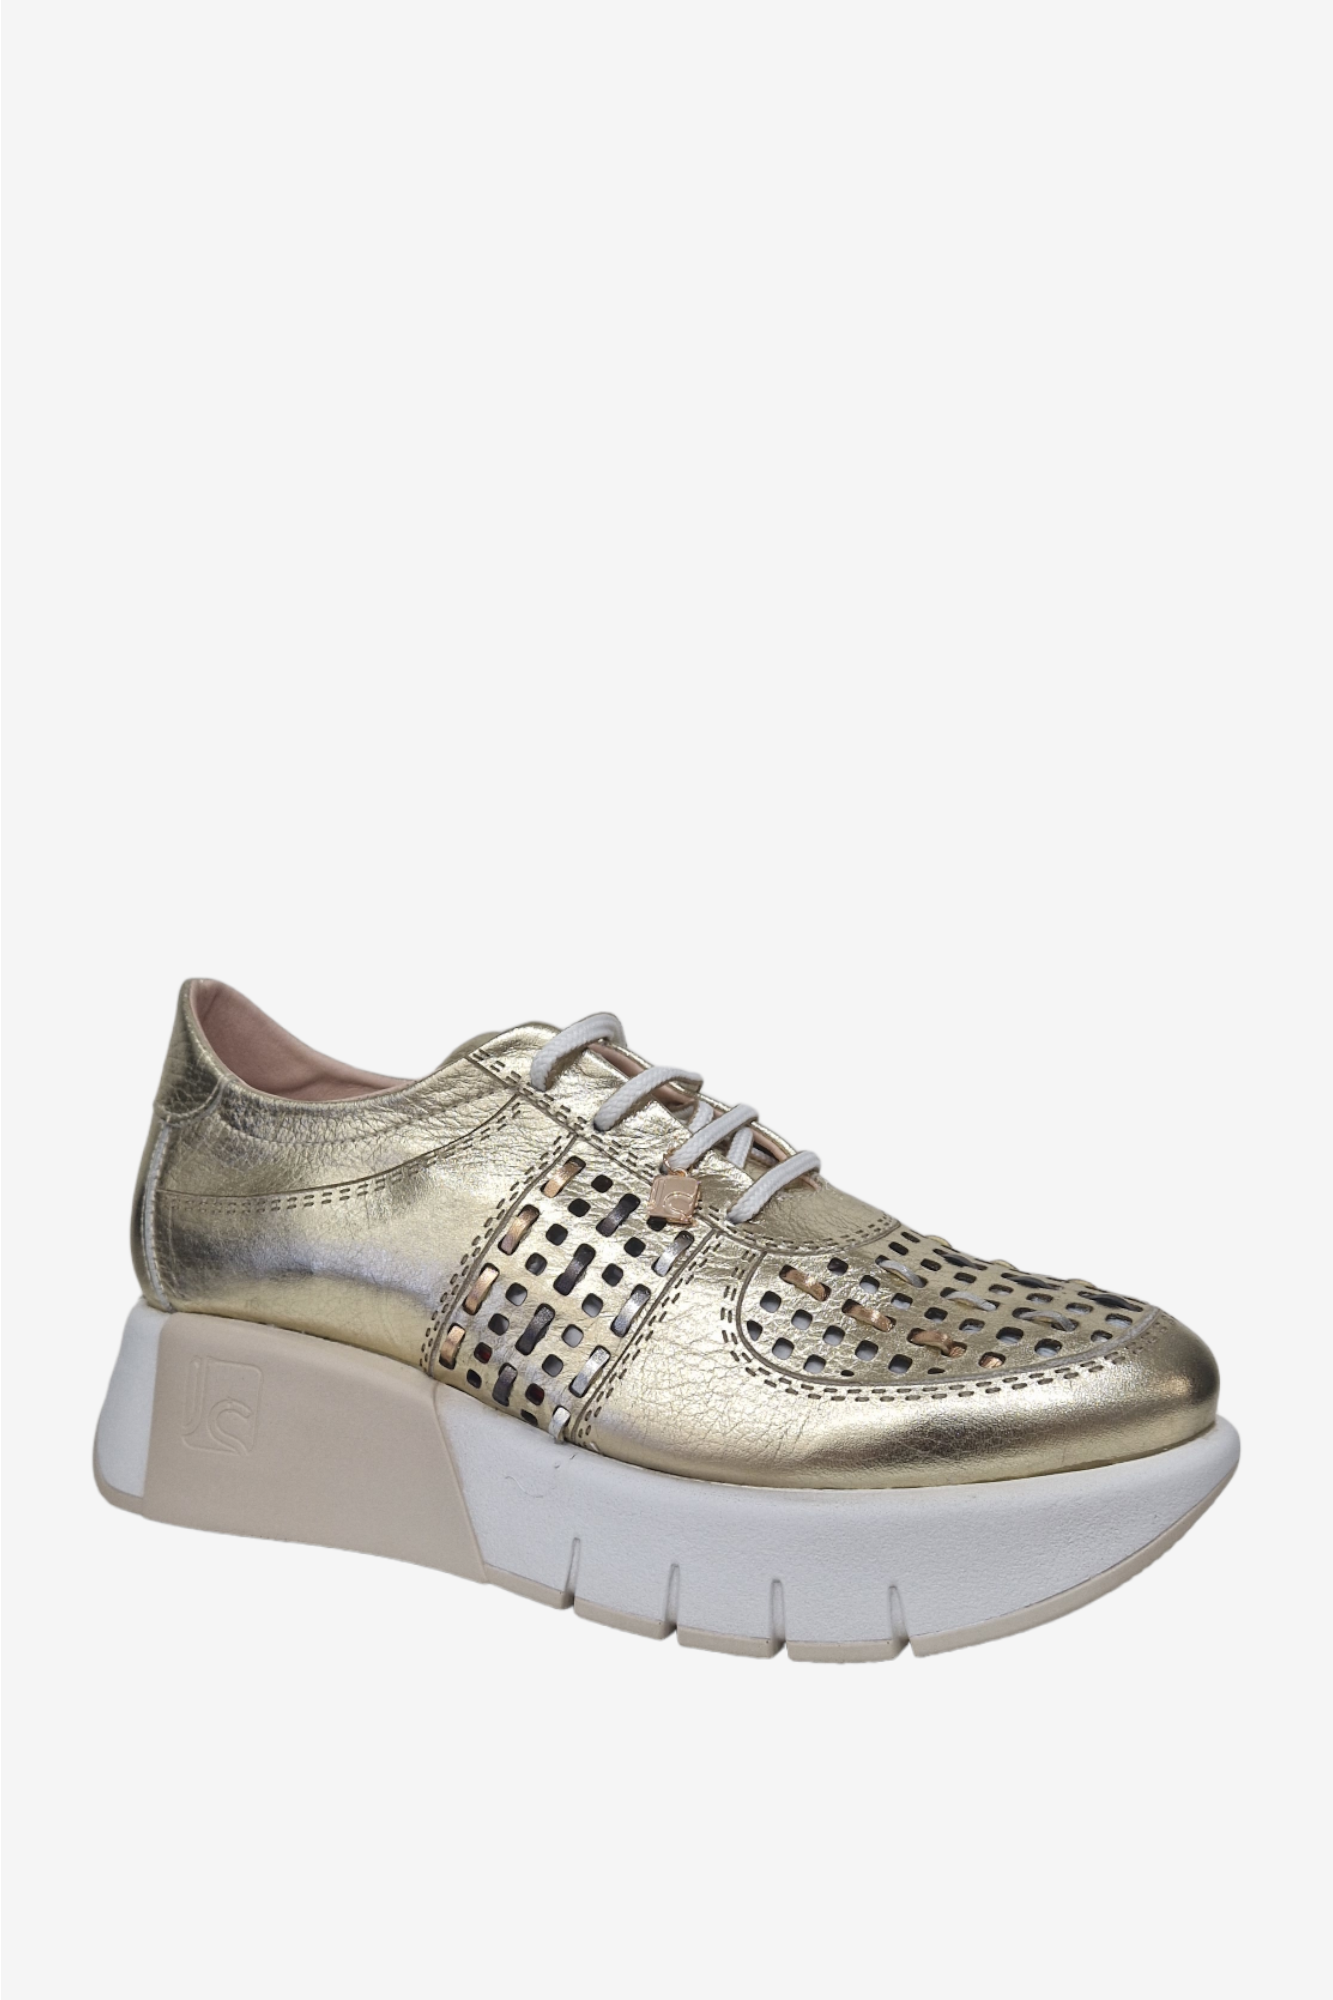 JOSE SAENZ 3524 GOLD LEATHER TRAINER